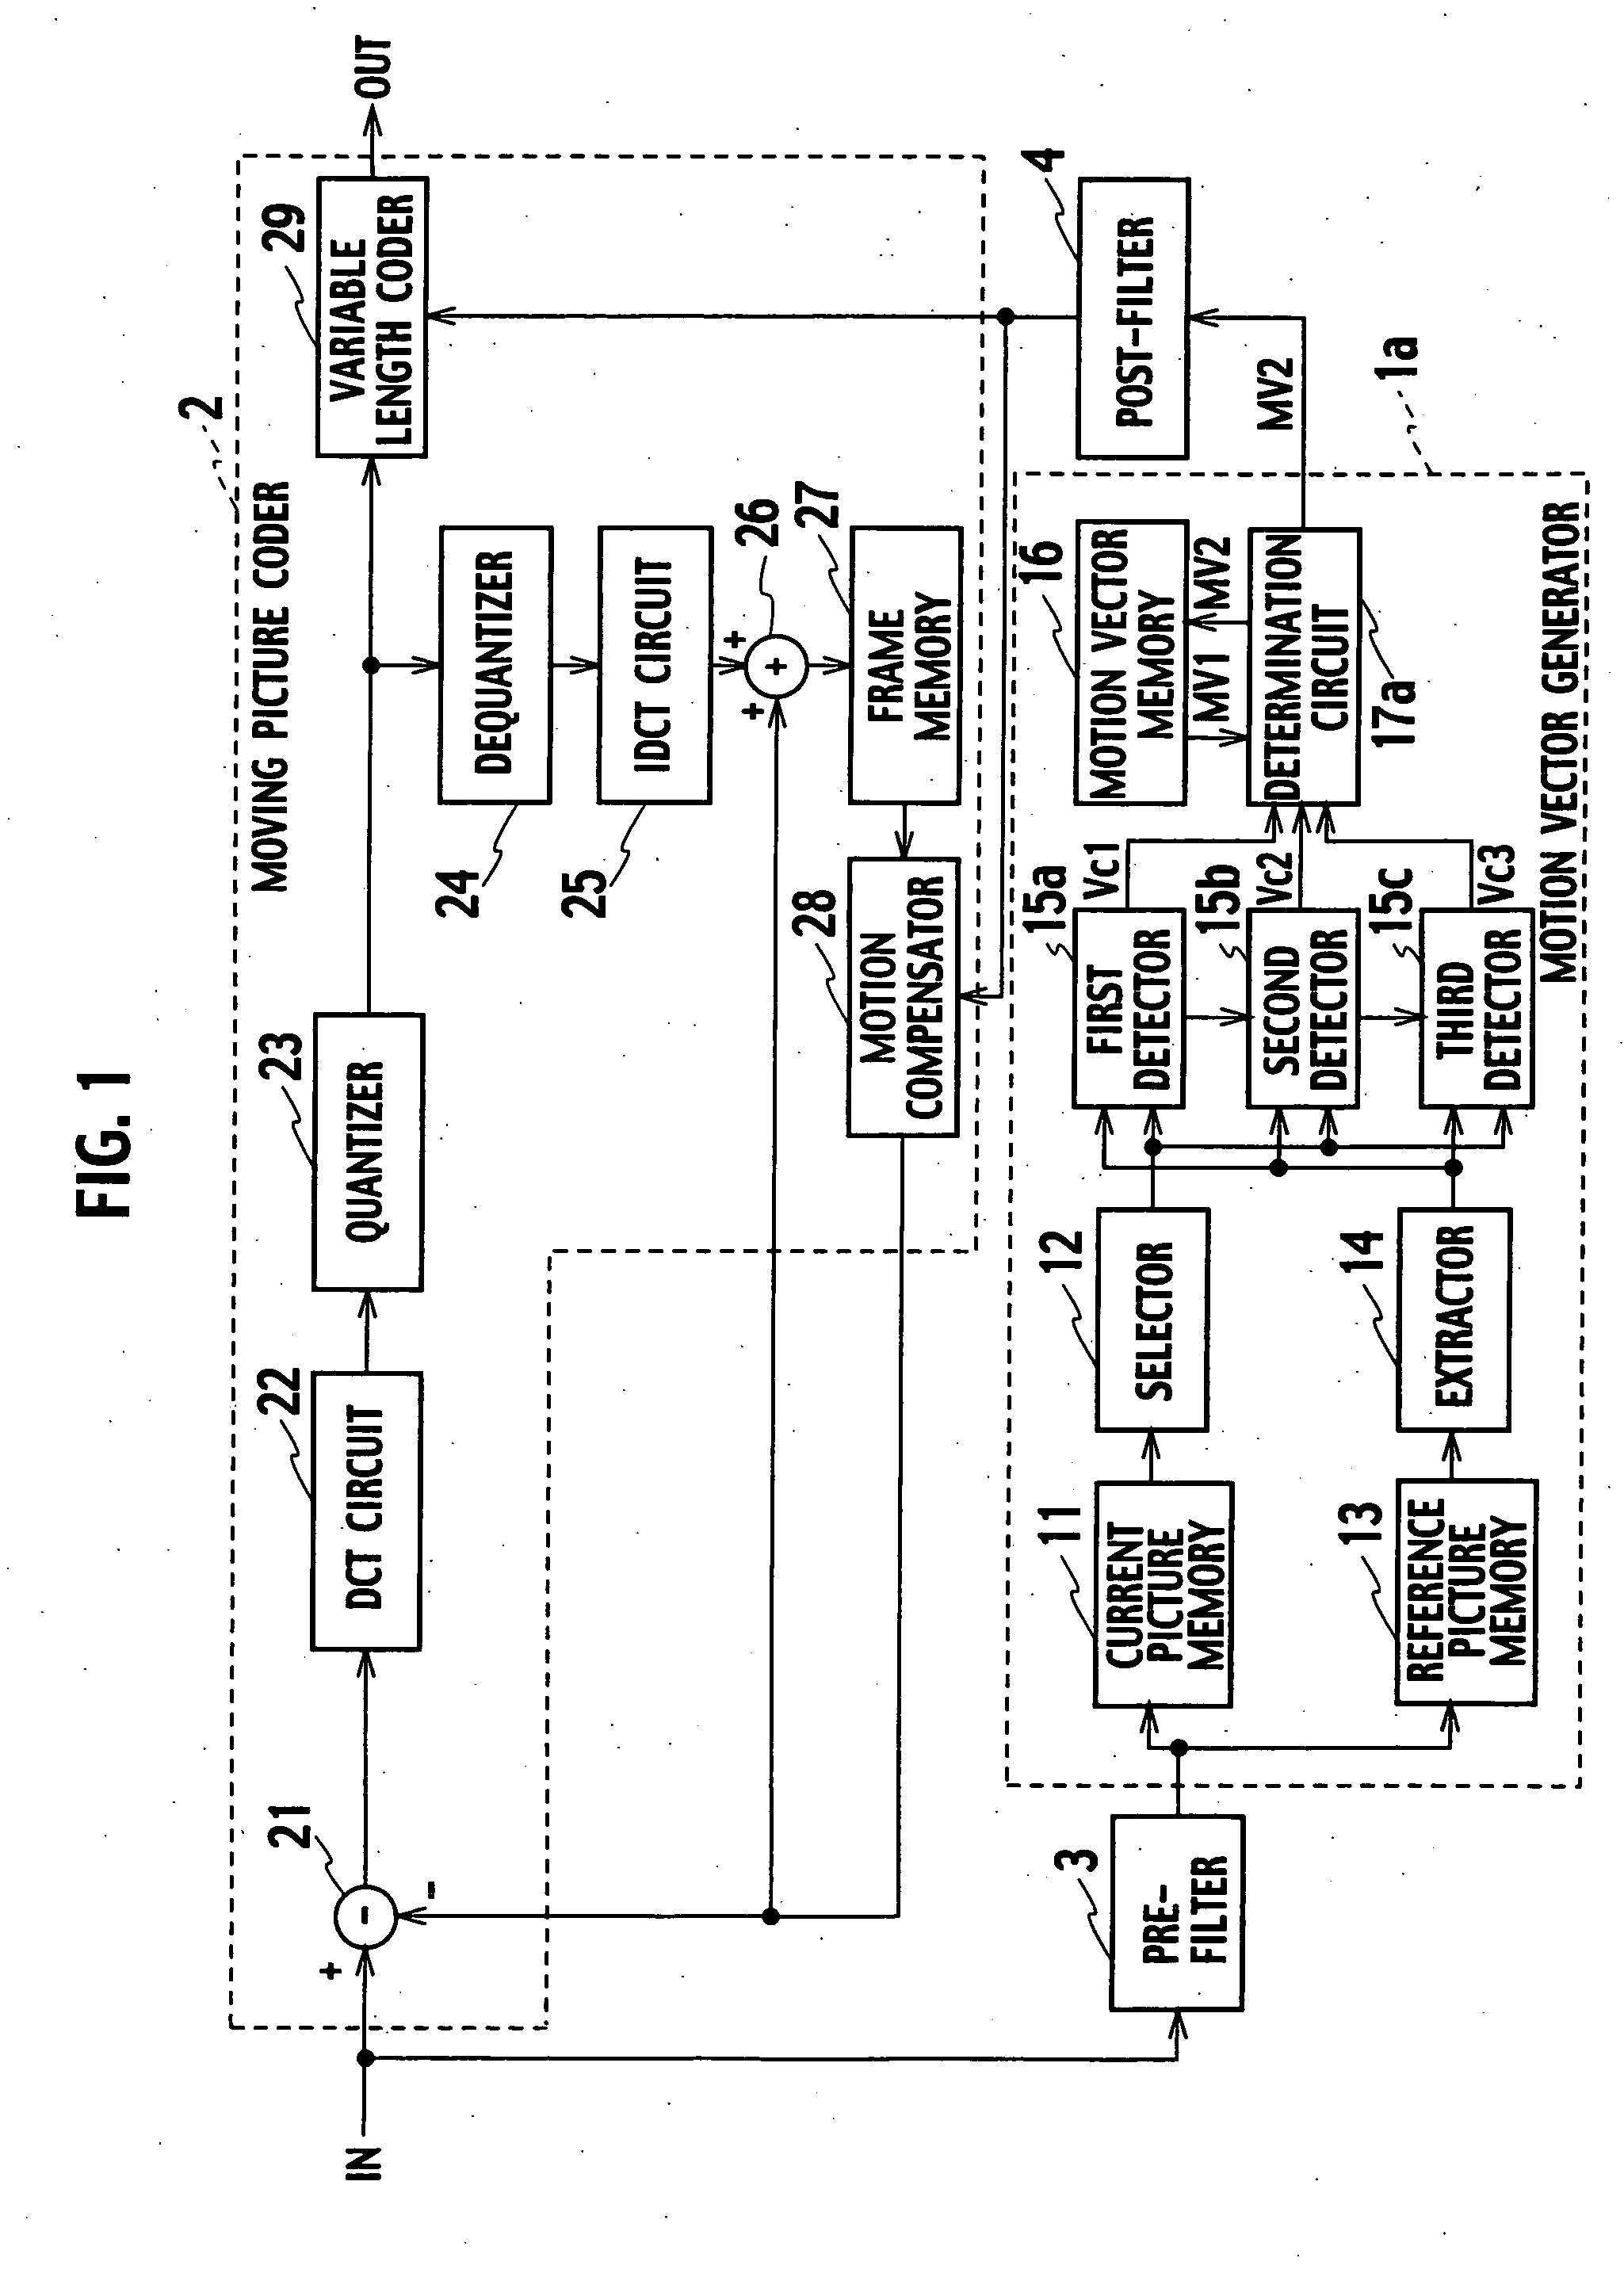 Moving picture processor, method for processing a moving picture, and computer program product for executing an application for a moving picture processor